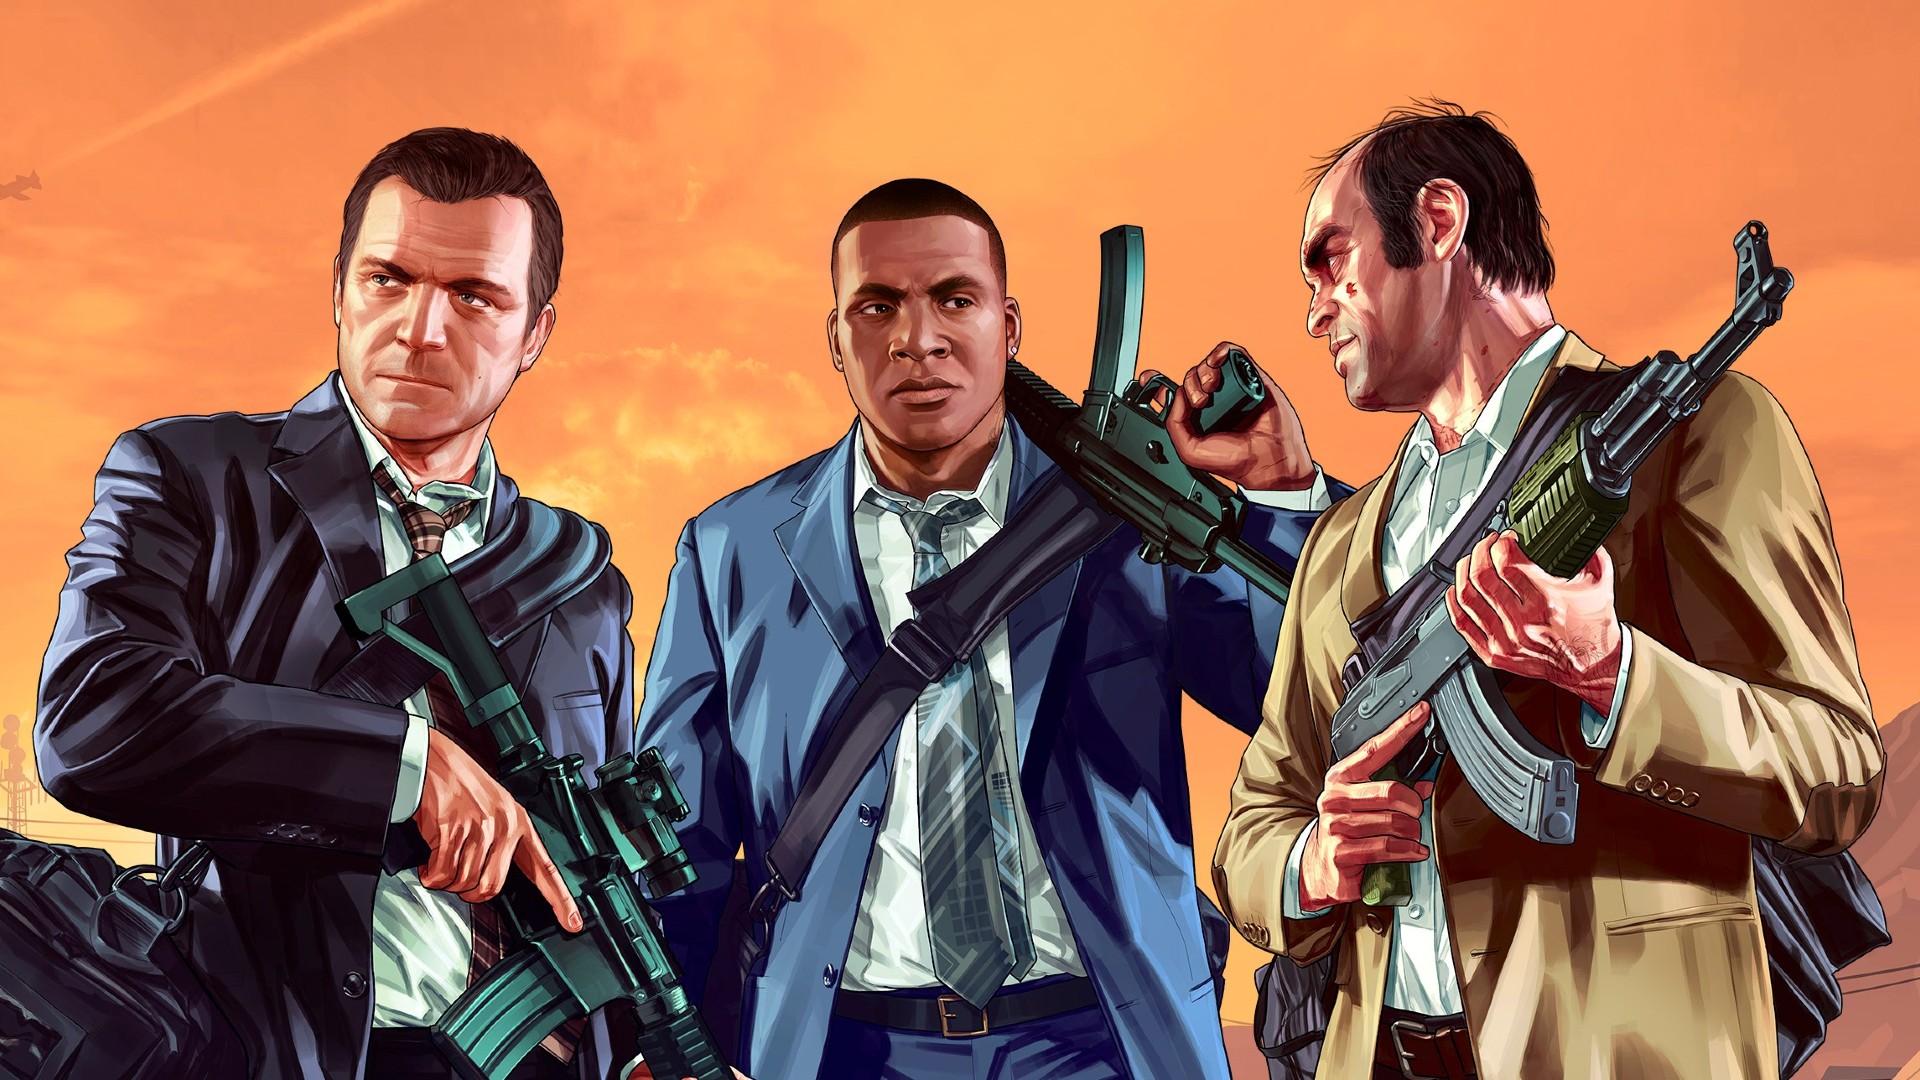 grand theft auto 6 movie characters